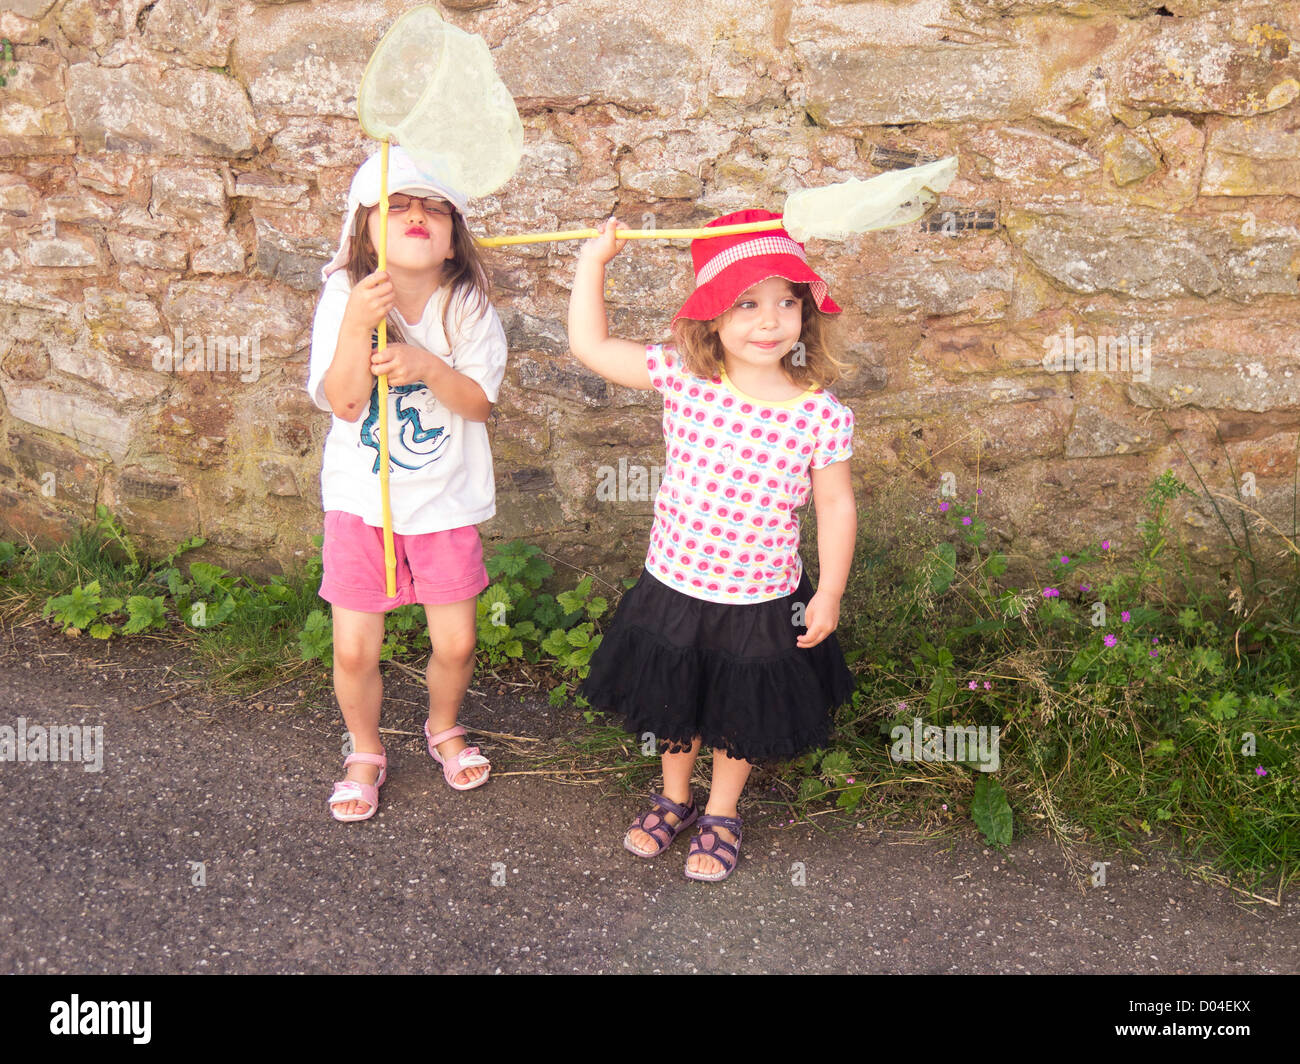 Young girls with fishing nets ready for an adventure outdoors Stock Photo